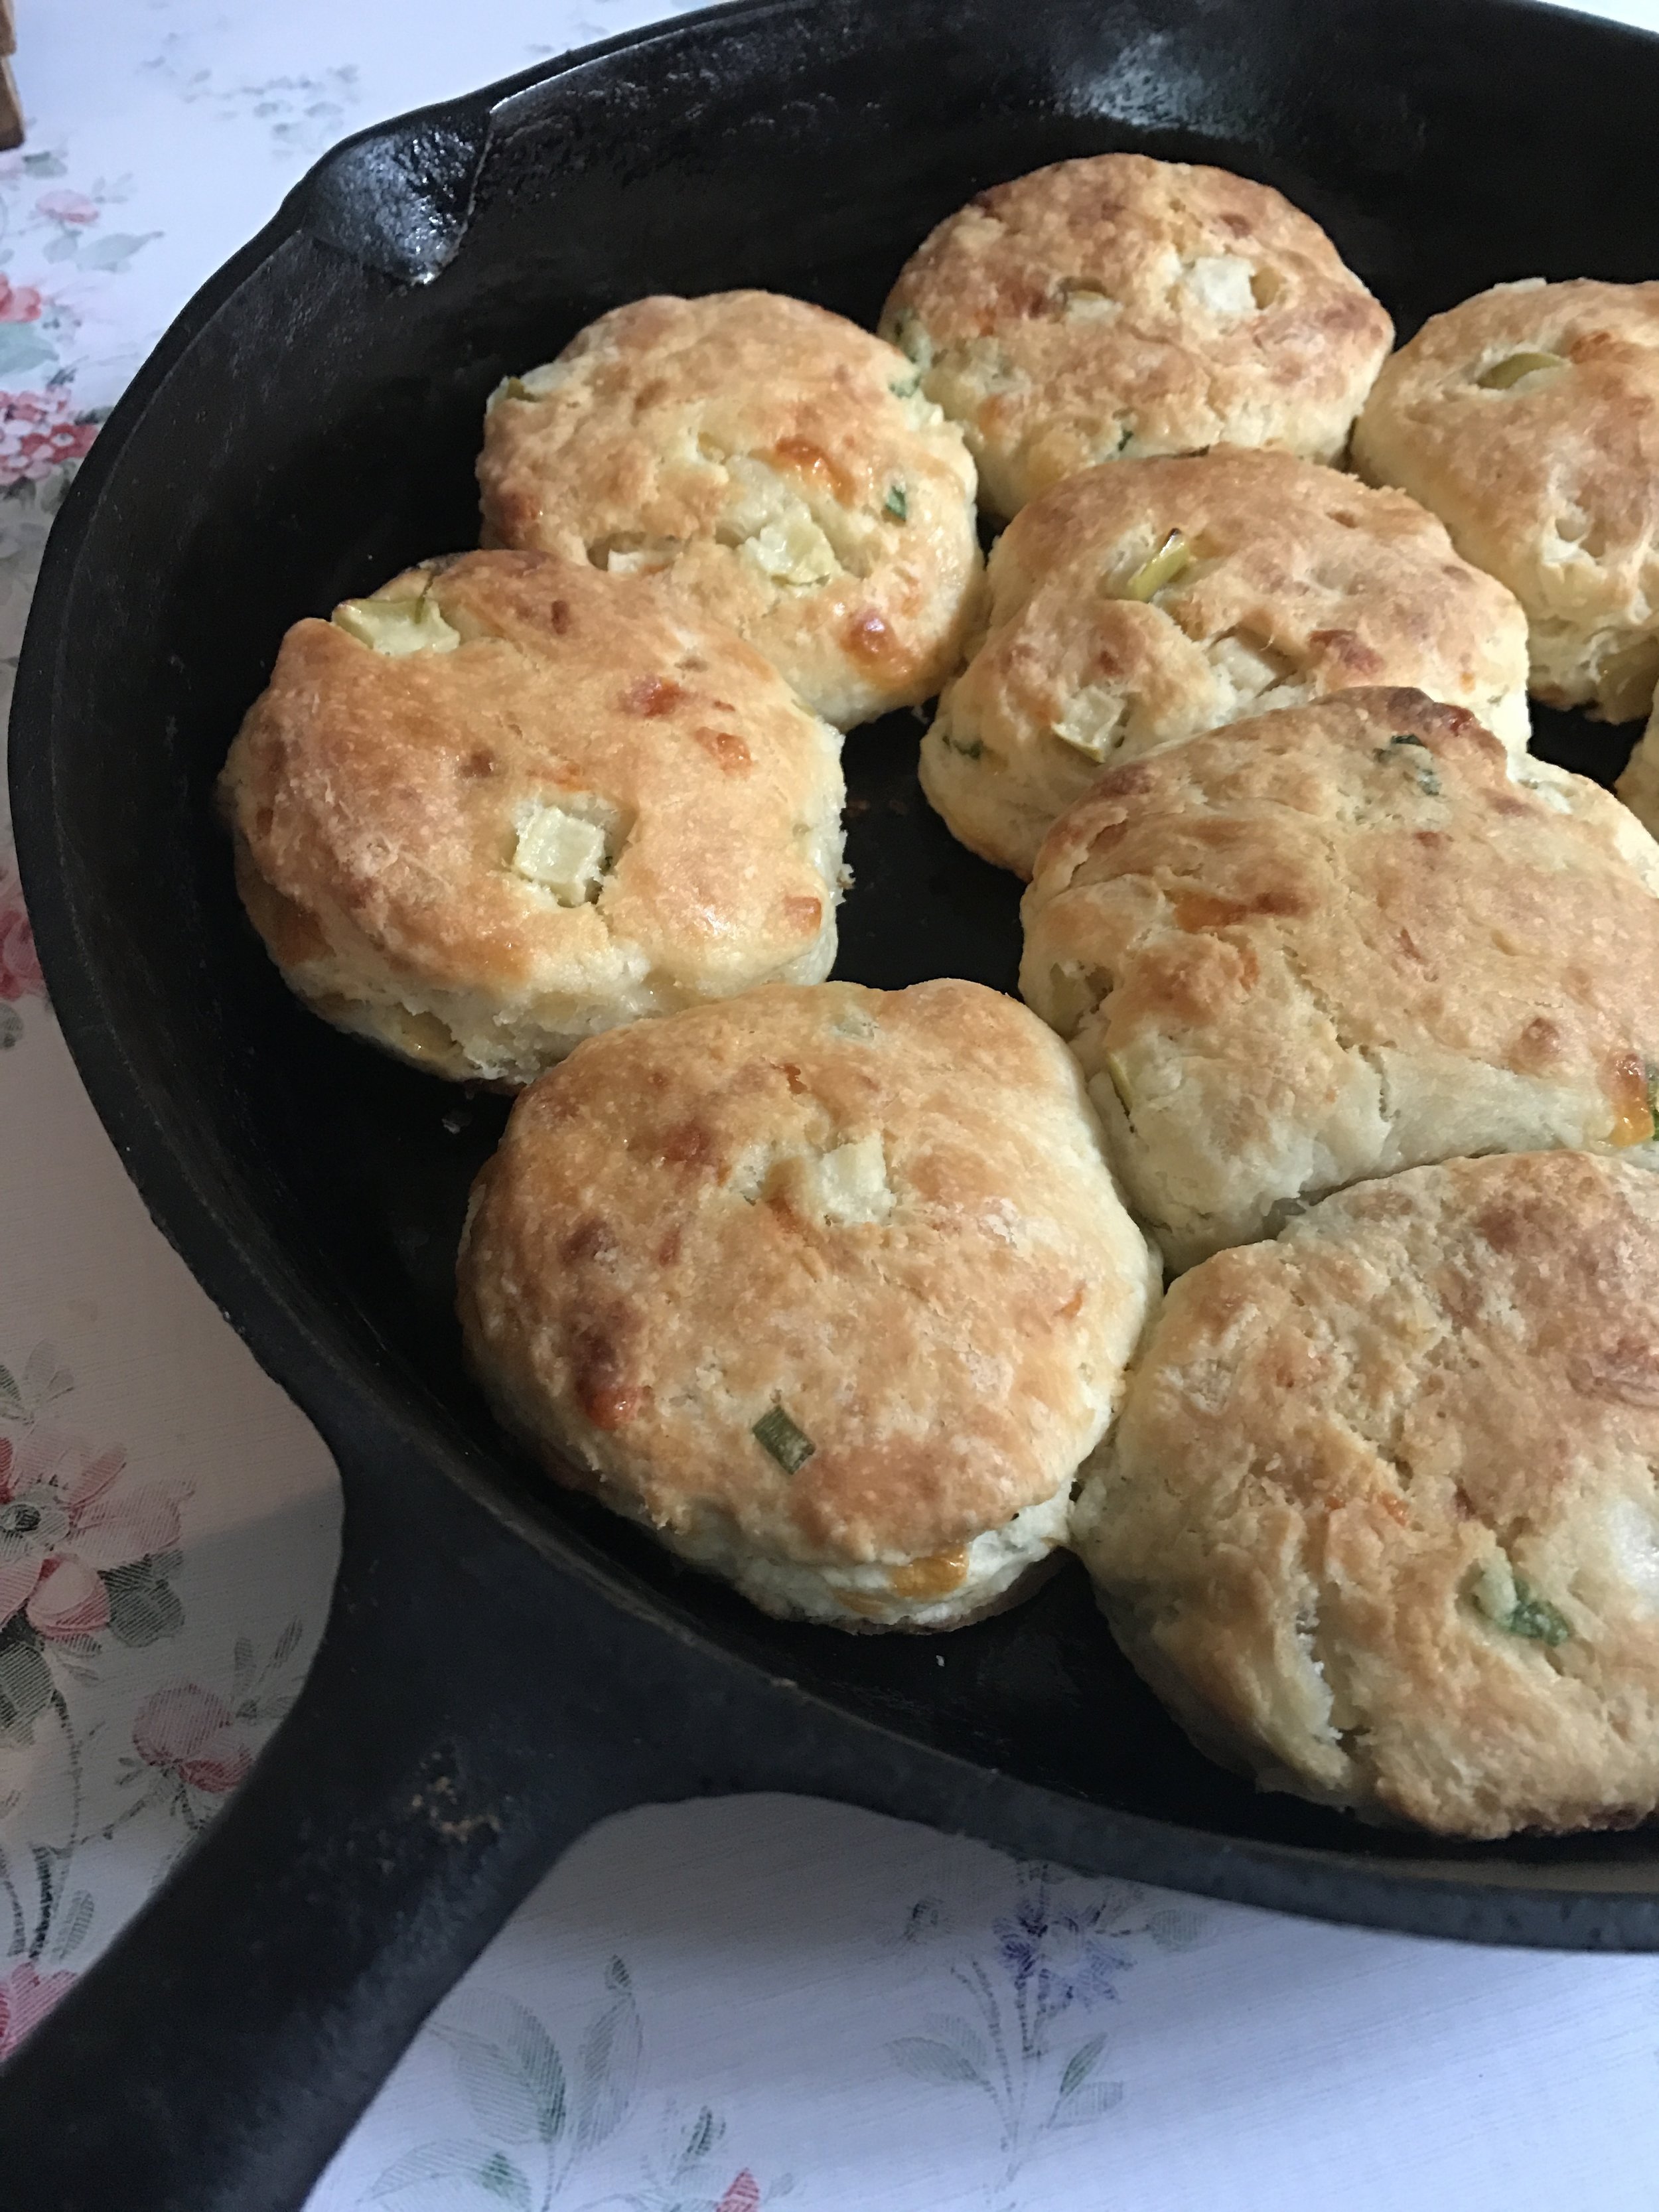 Green Apple, Smoked Cheddar and Chives Biscuits 2.jpg